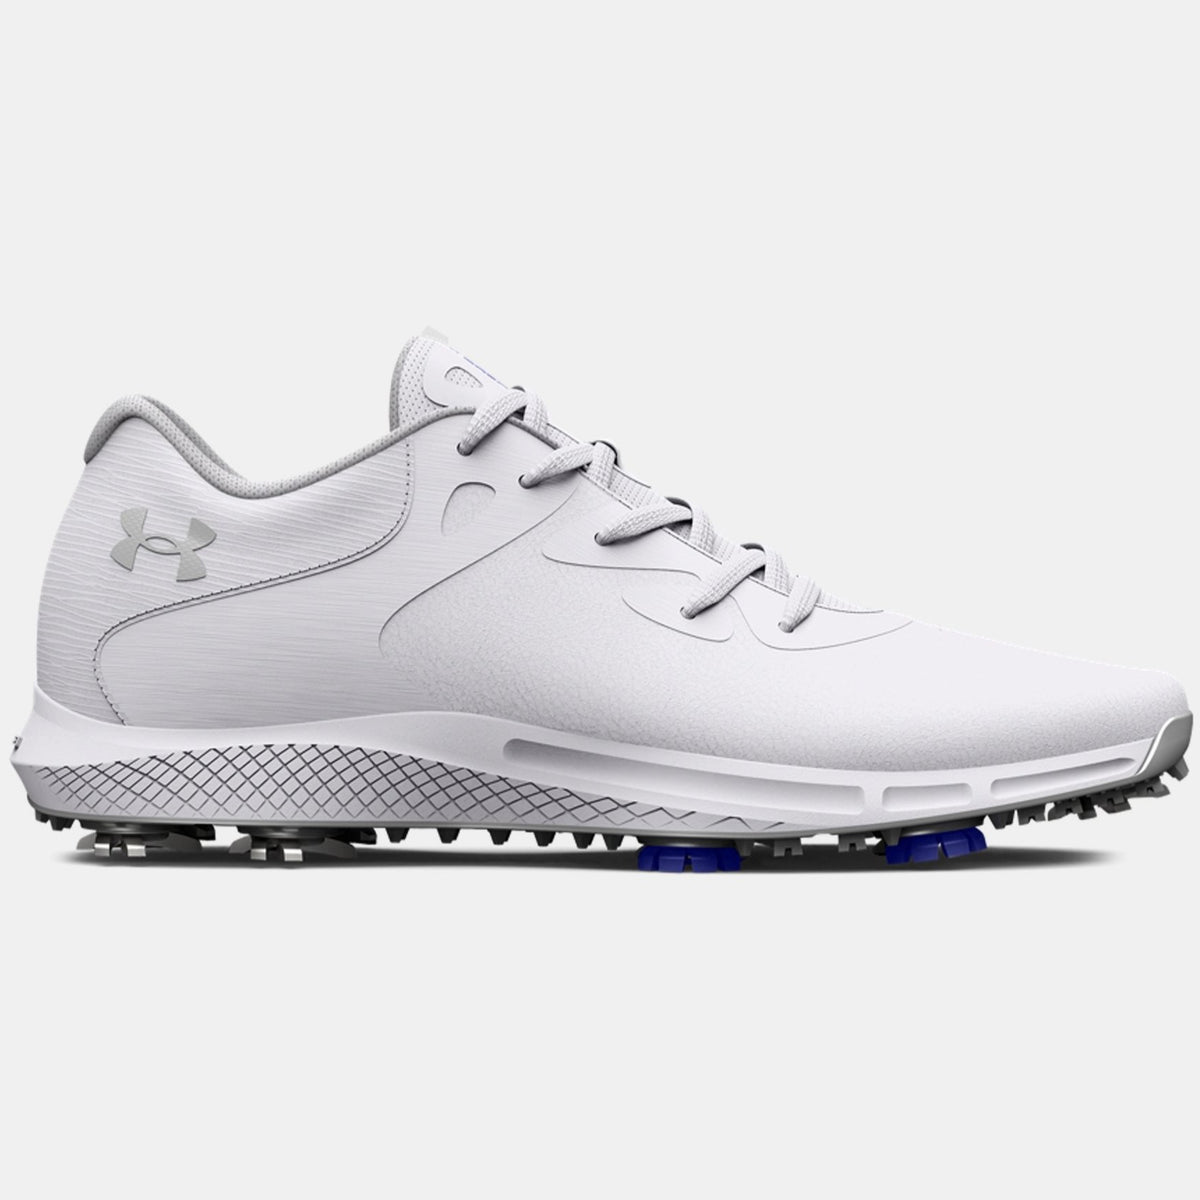 Under Armour Charged Breathe 2 Shoe Women's (White Silver)